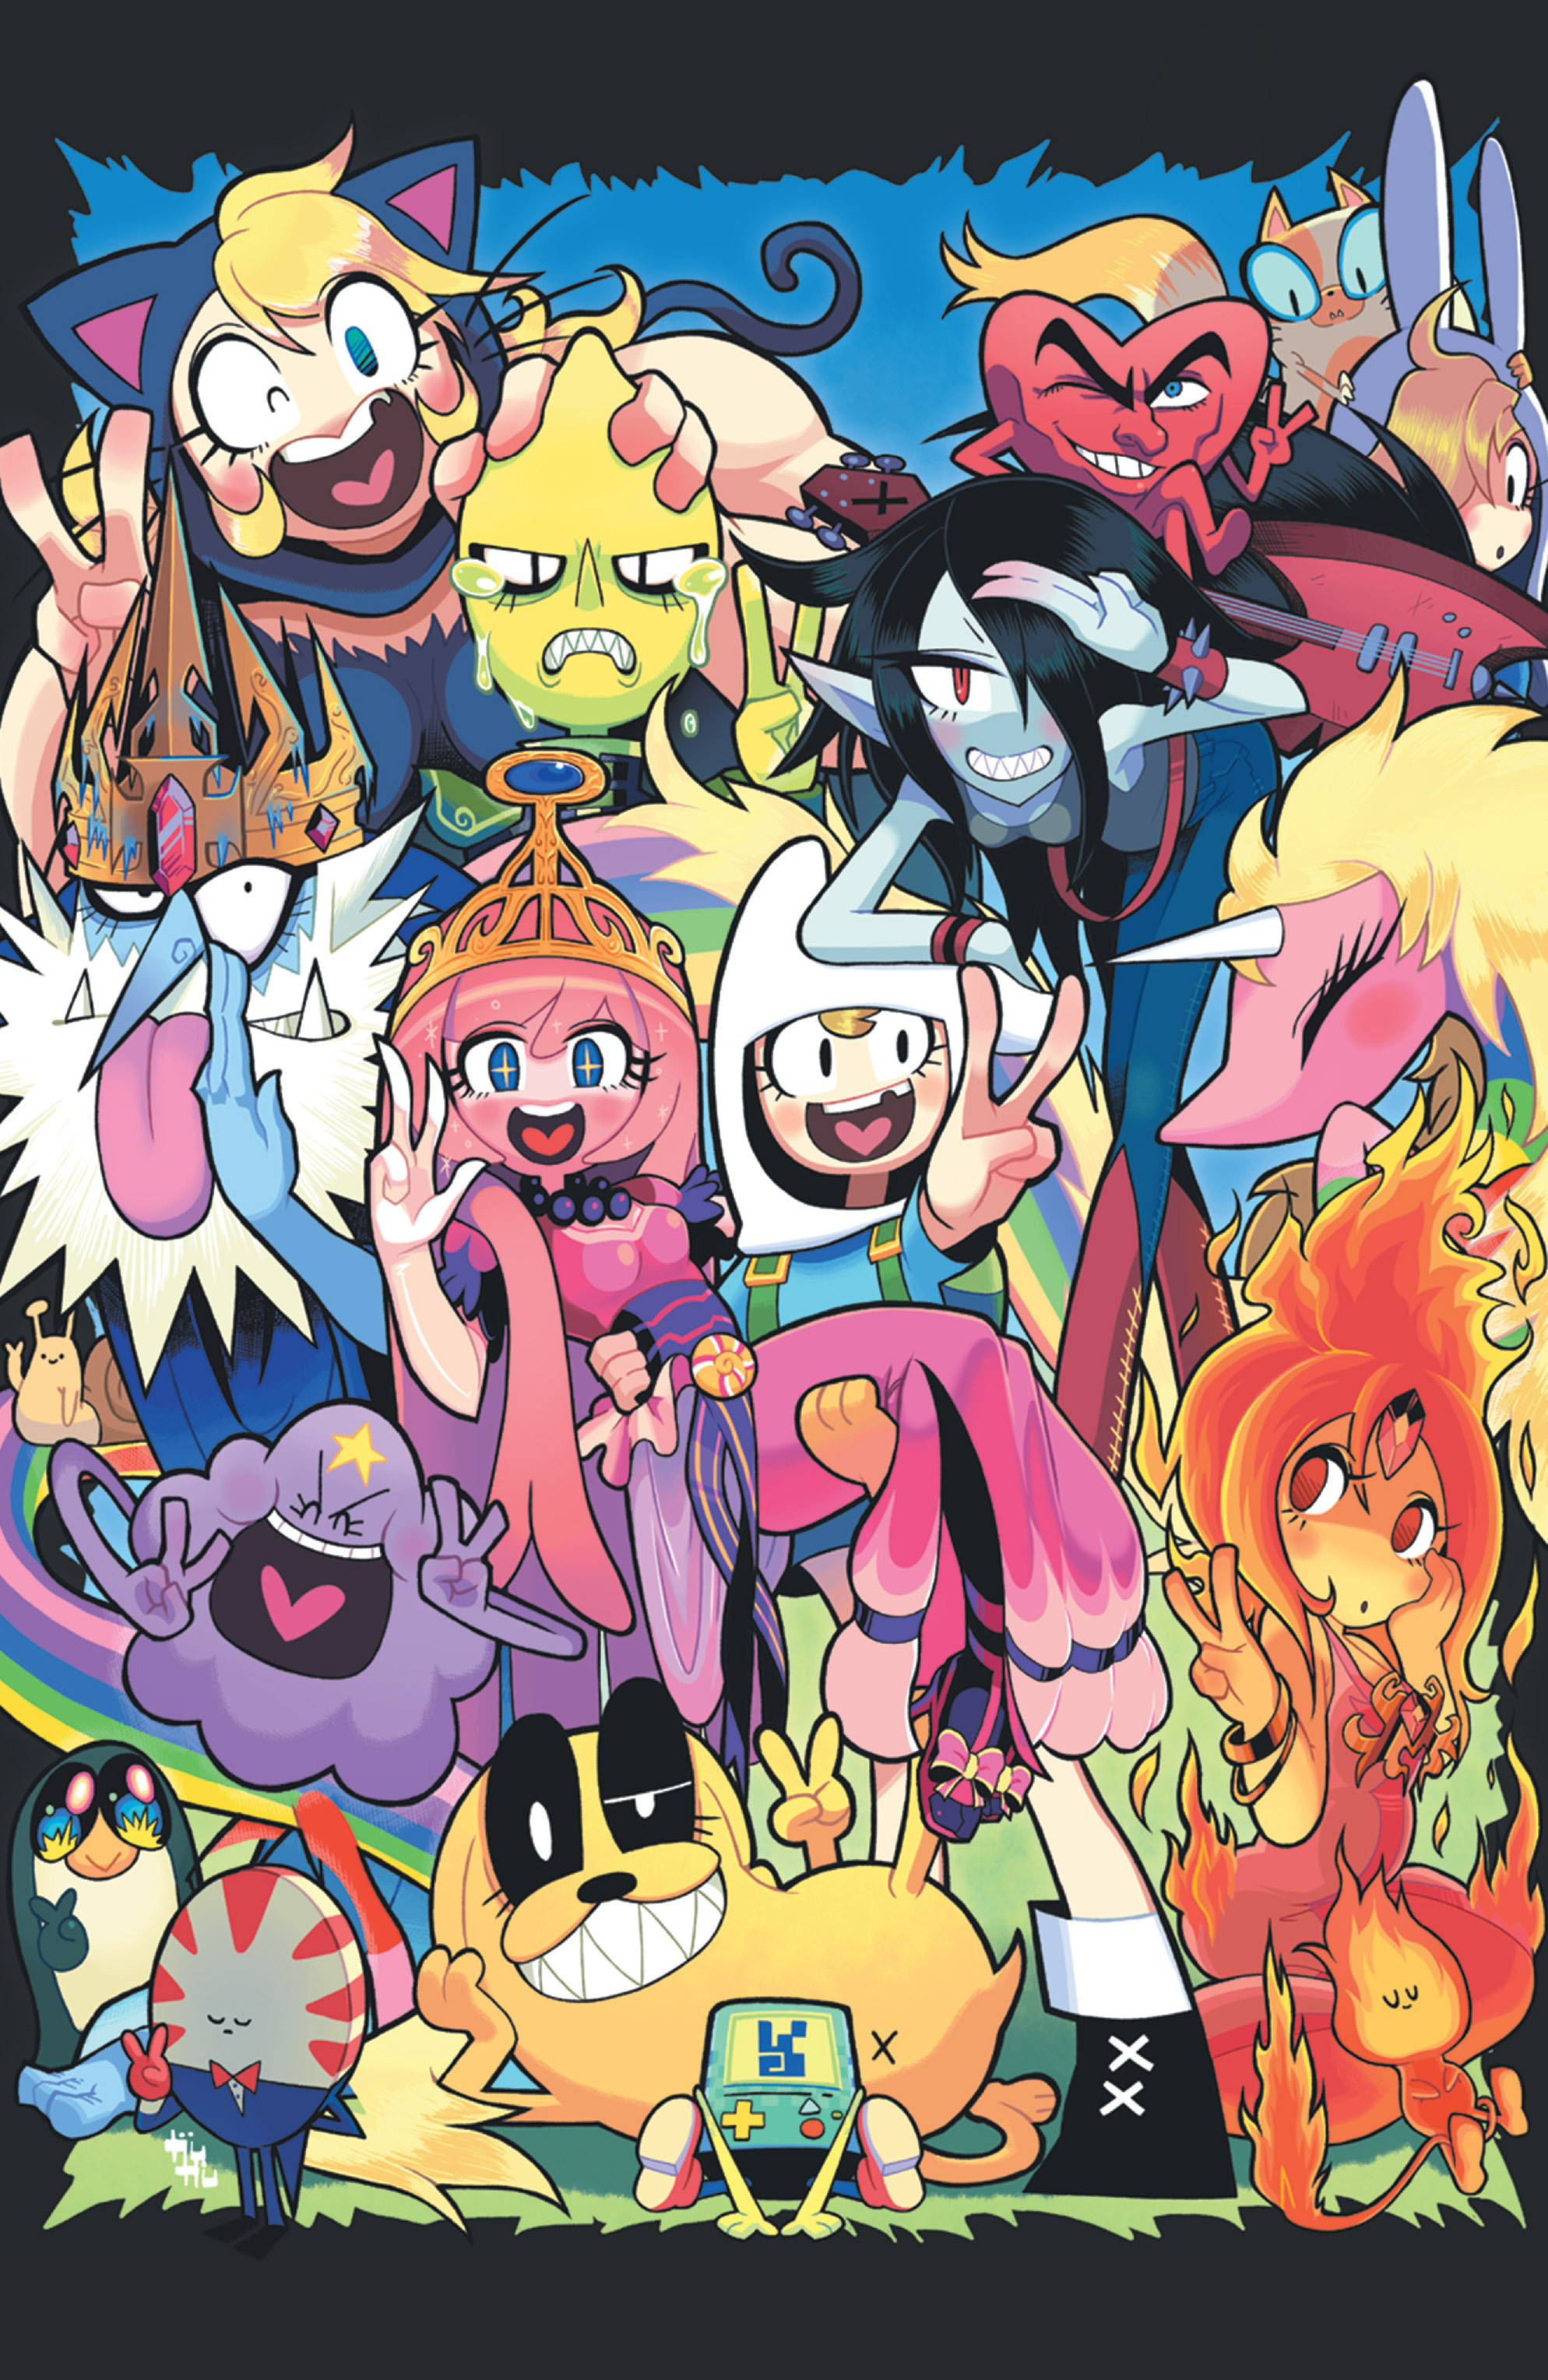 Read online Adventure Time comic -  Issue #21 - 3